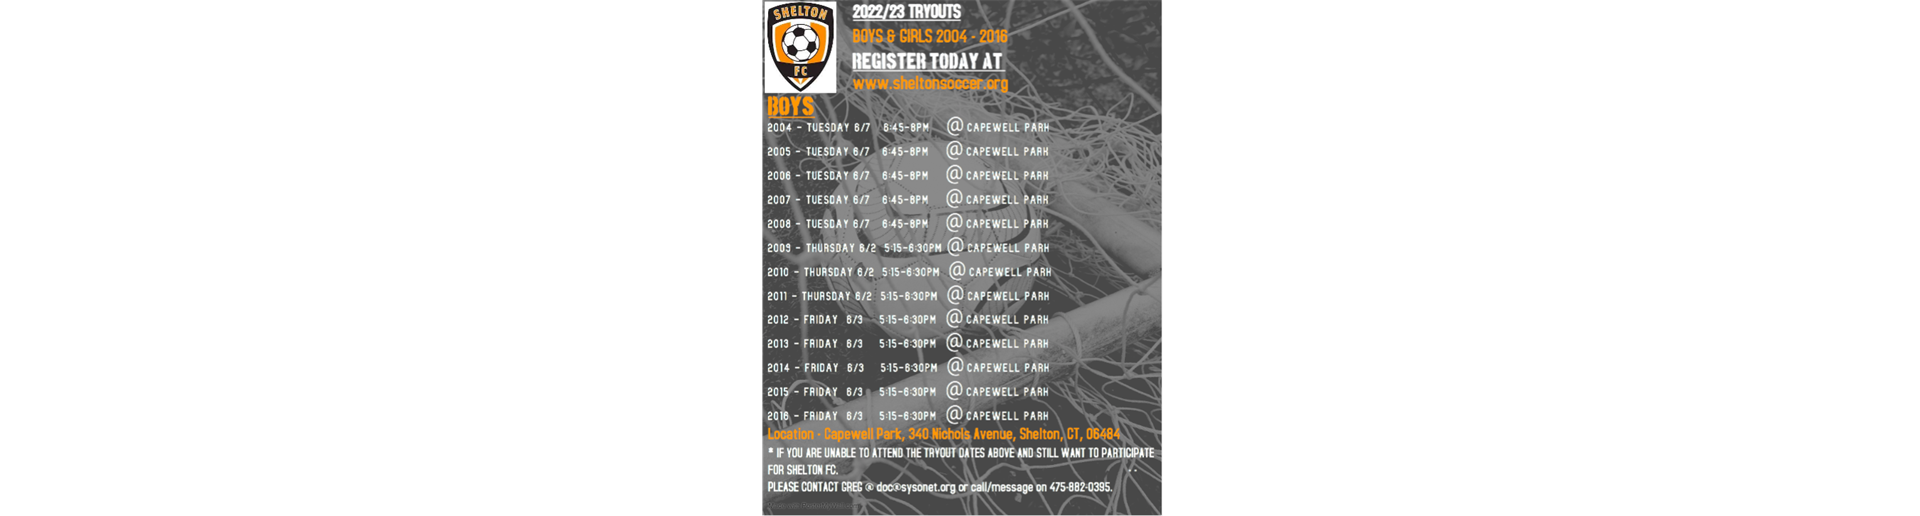 UPCOMING Shelton FC Boys Tryouts 2022/23. SIGN UP NOW!